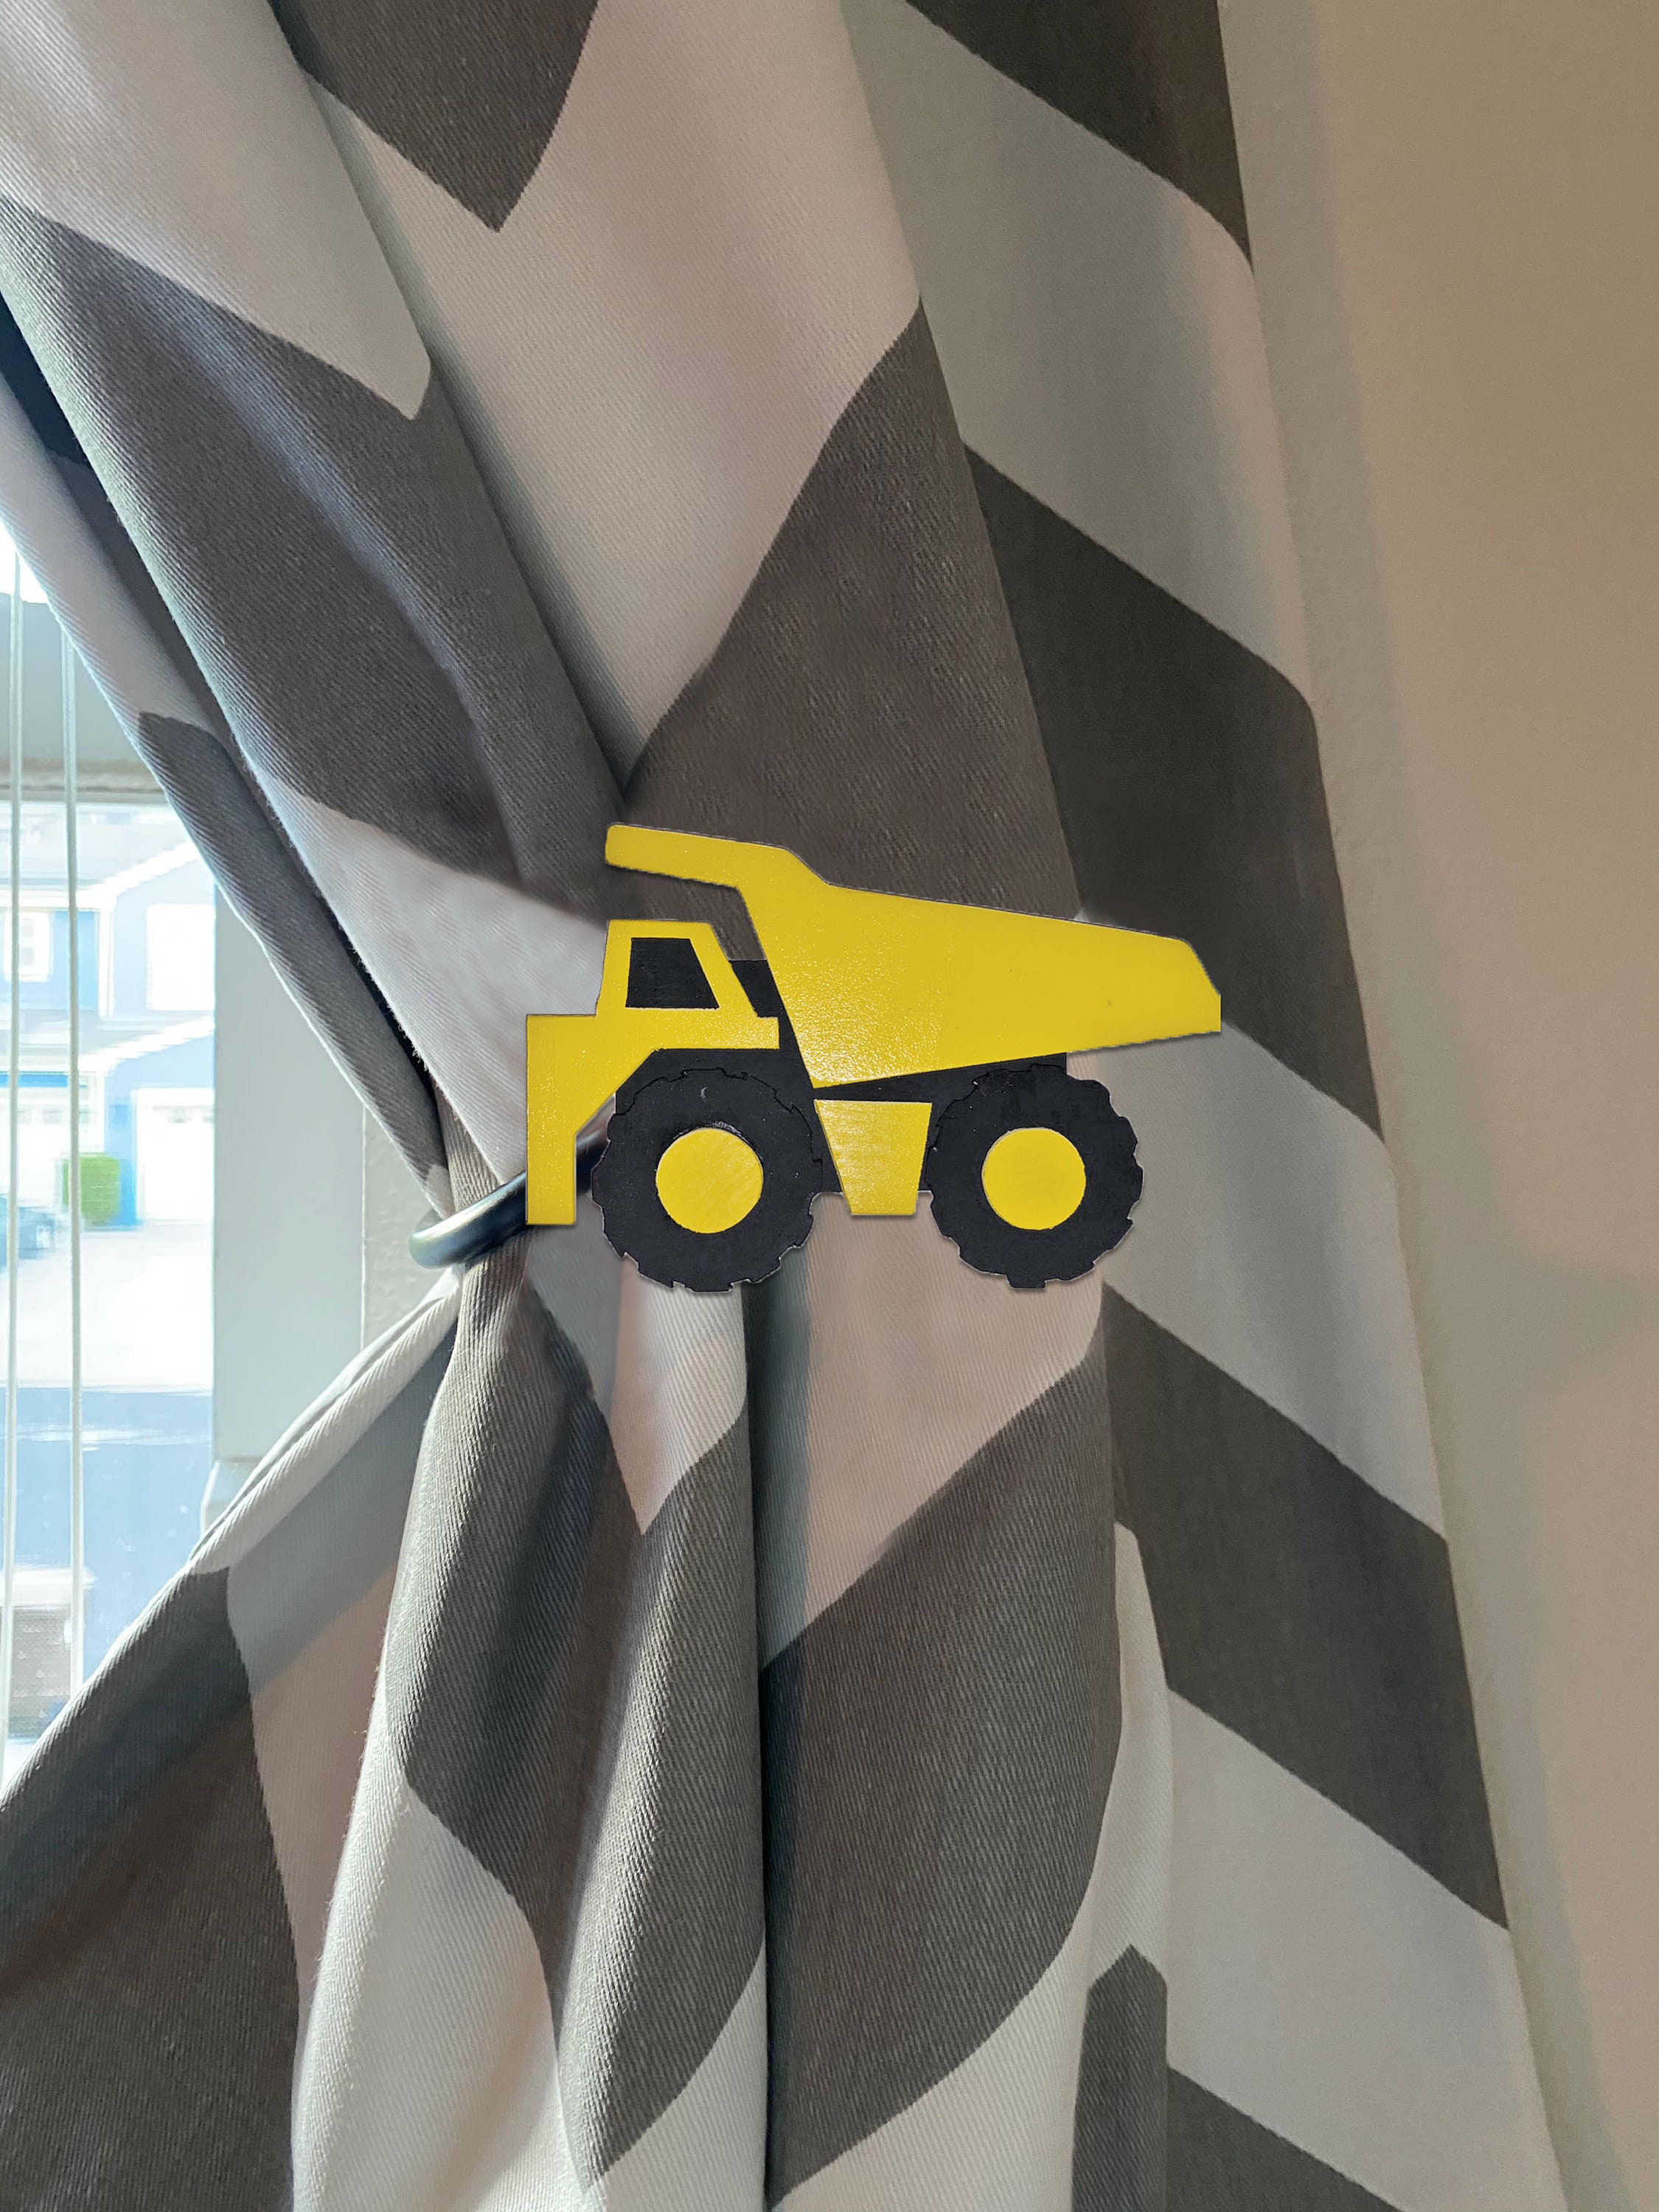 Retro Car Blackout Curtain, Vintage Cartoon Style Repair Shop Garage  Colorful Old Cars Pattern Window Rod Pocket Thermal Insulated Drapes Home  Decor